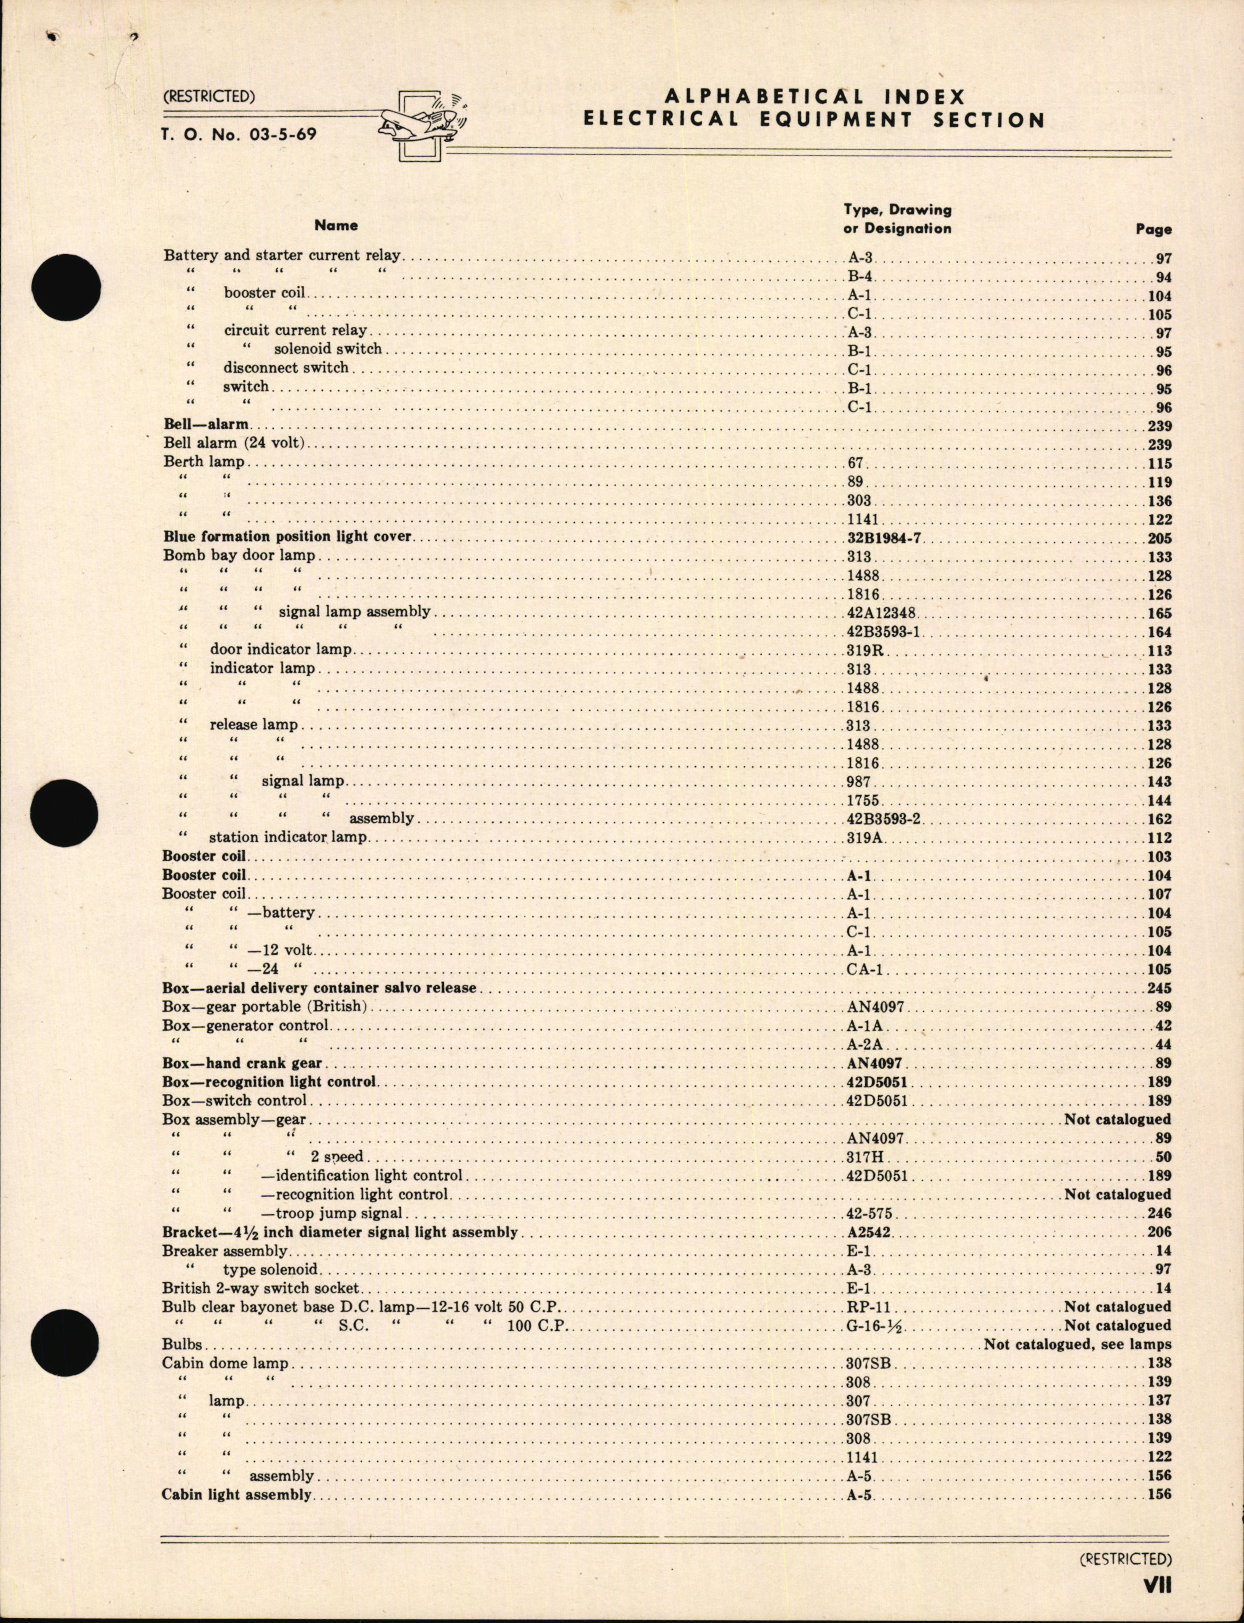 Sample page 7 from AirCorps Library document: Index of Army-Navy Aeronautical Equipment - Electrical